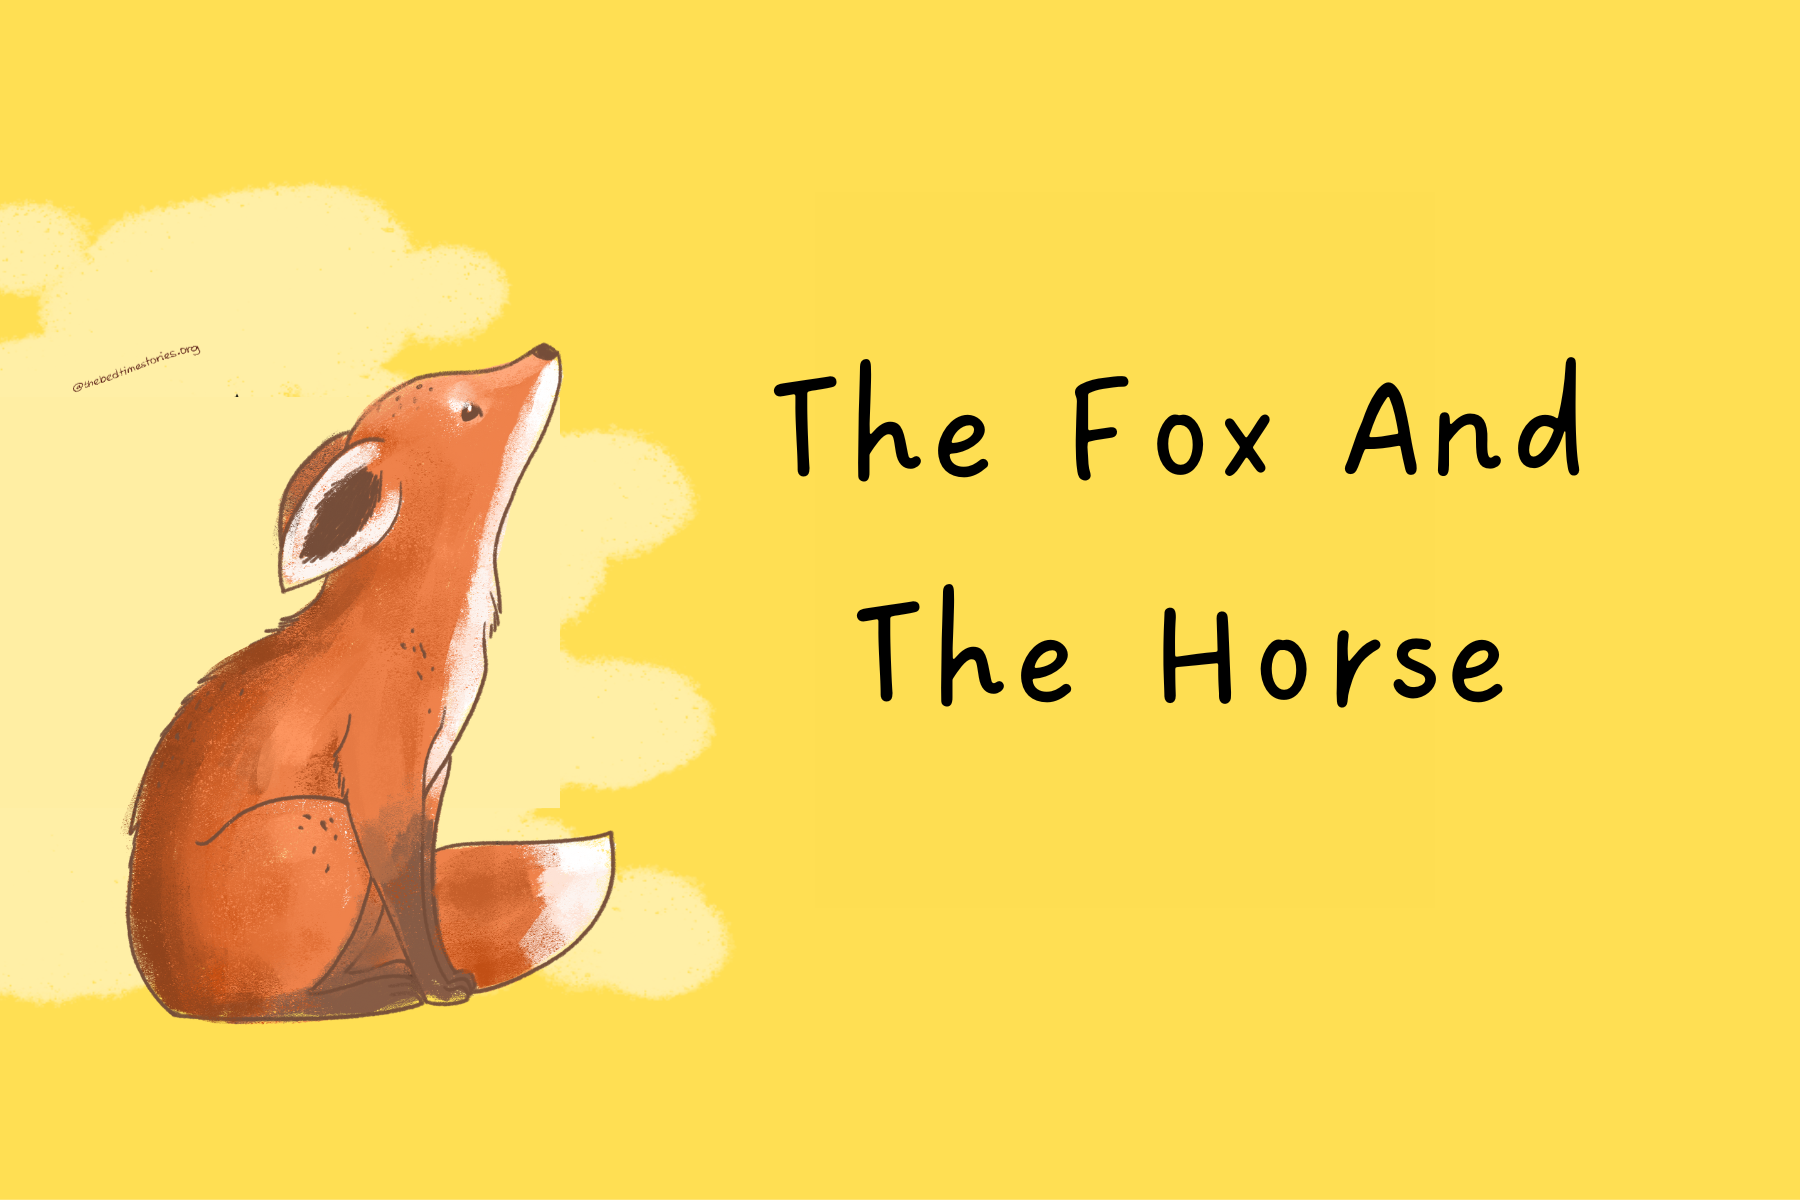 The Fox and The Horse